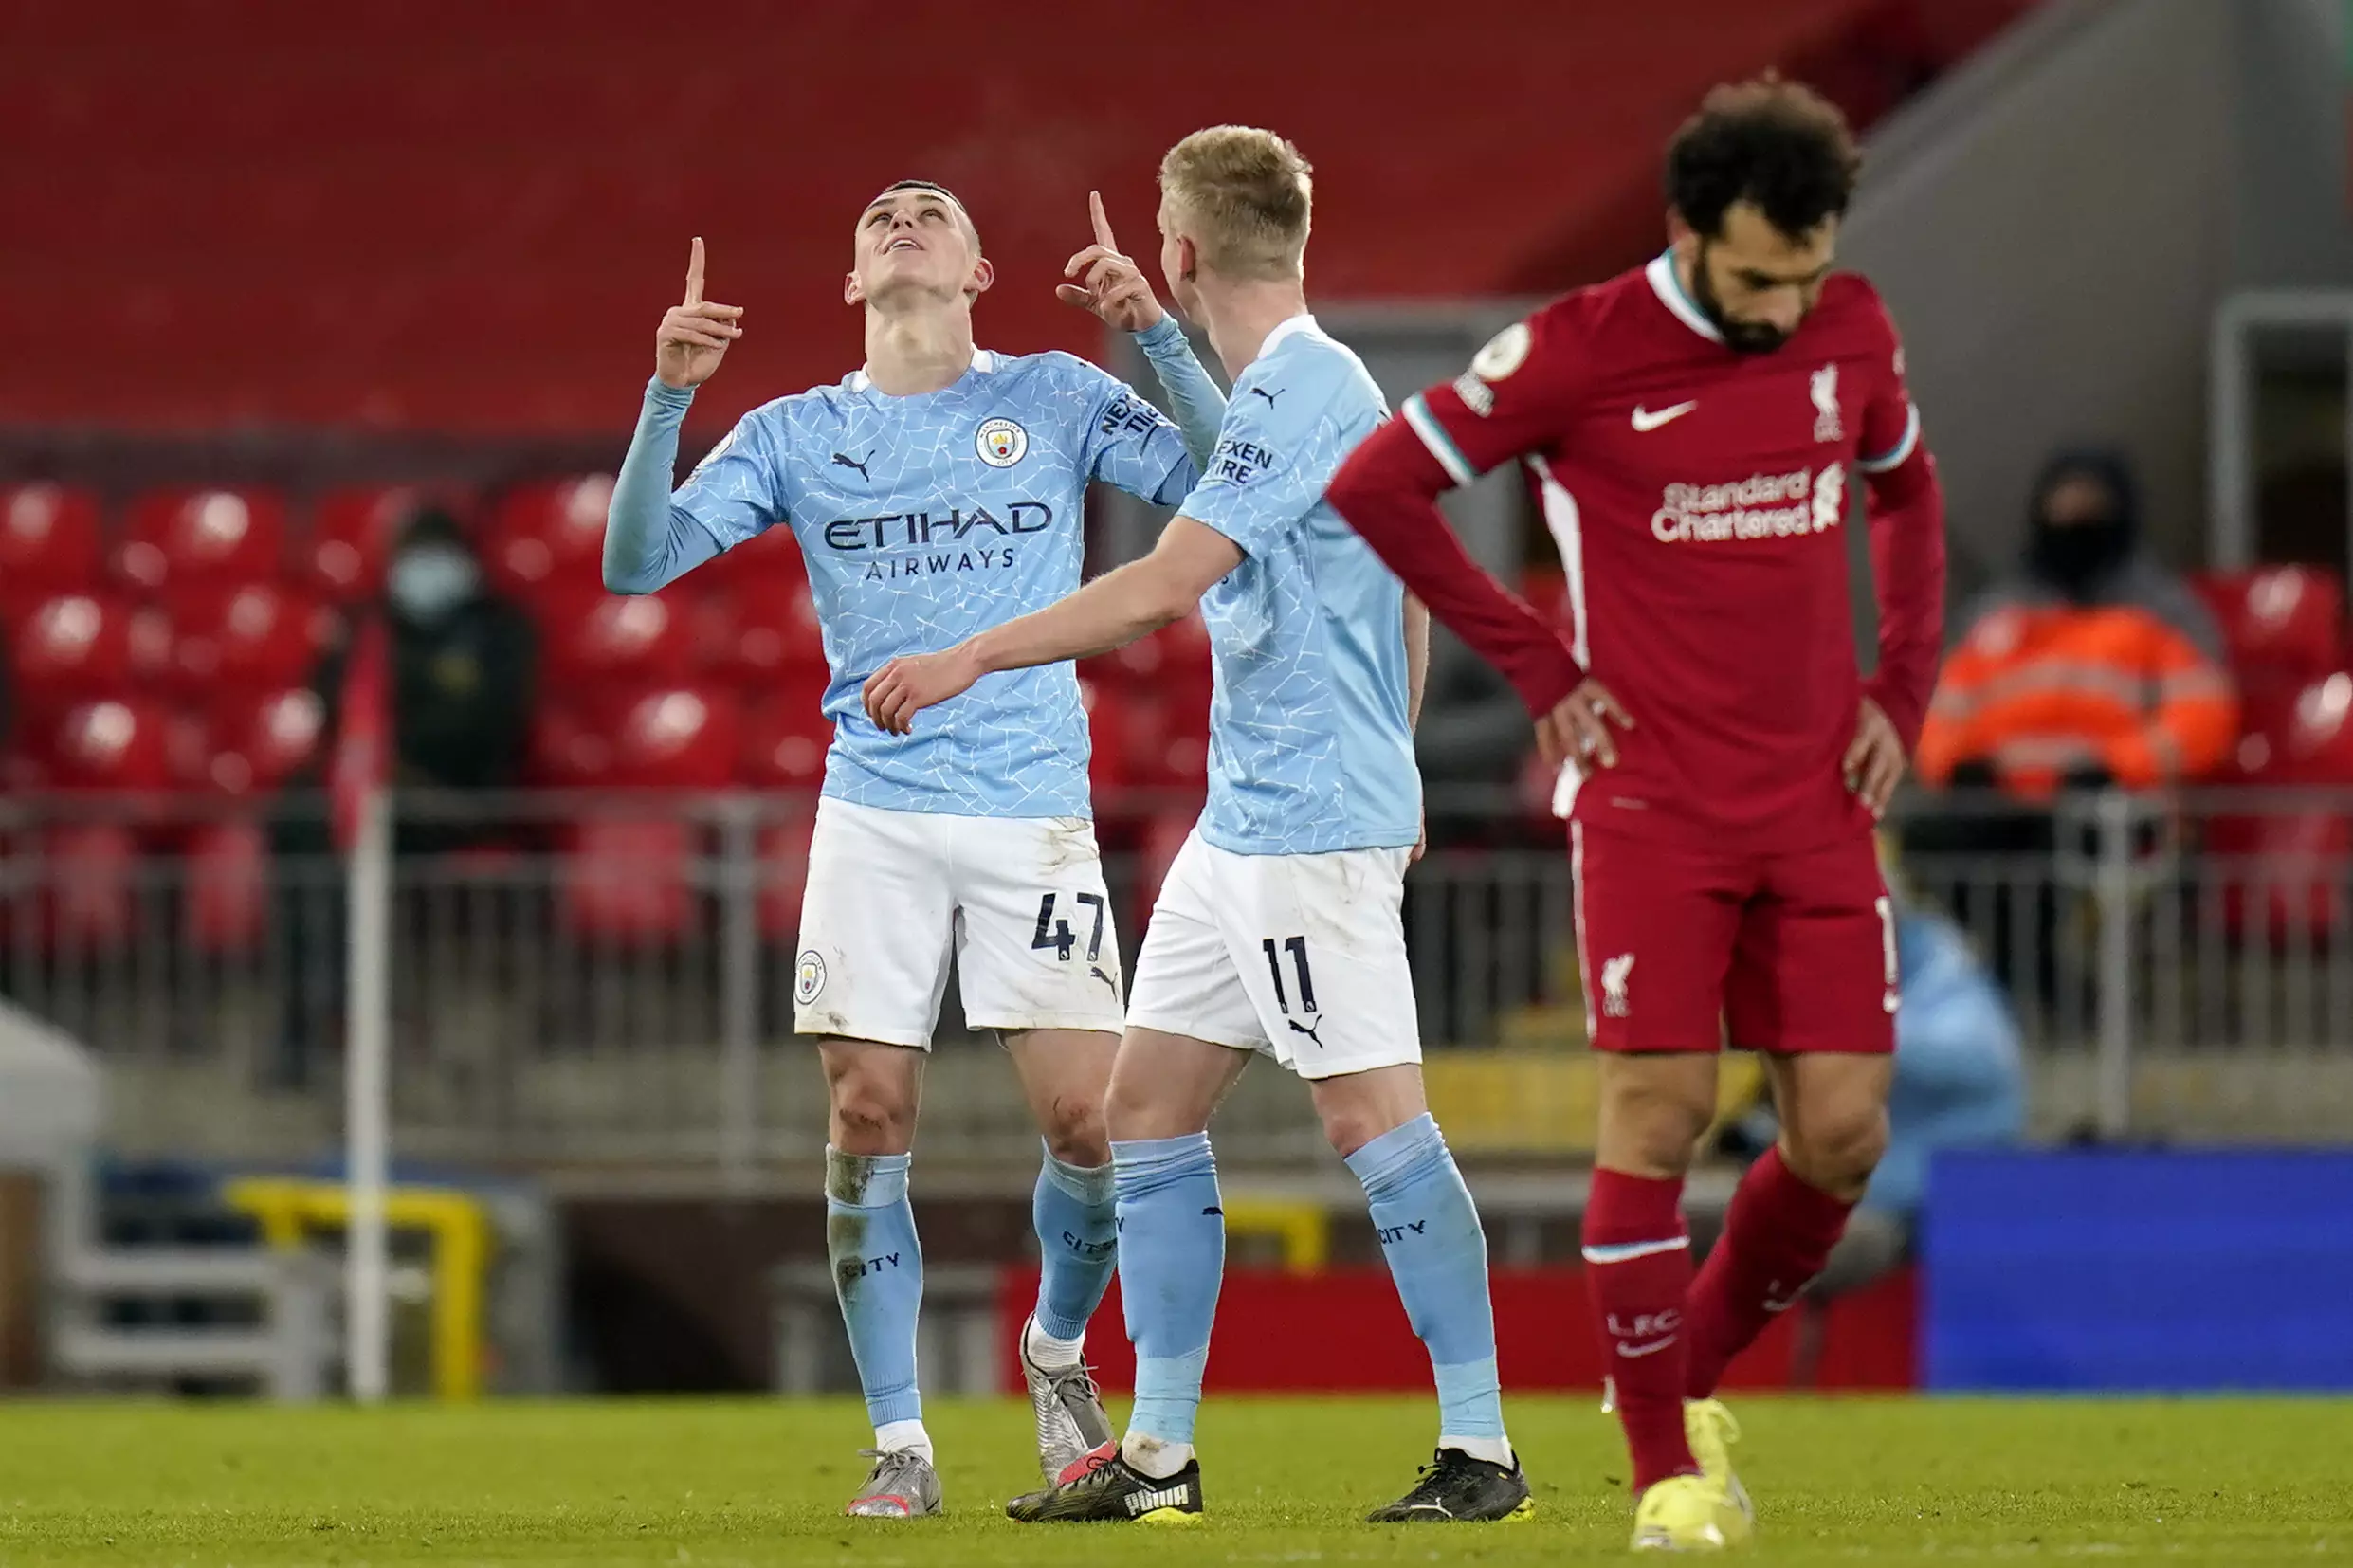 City scored three goals late on against Liverpool. Image: PA Images